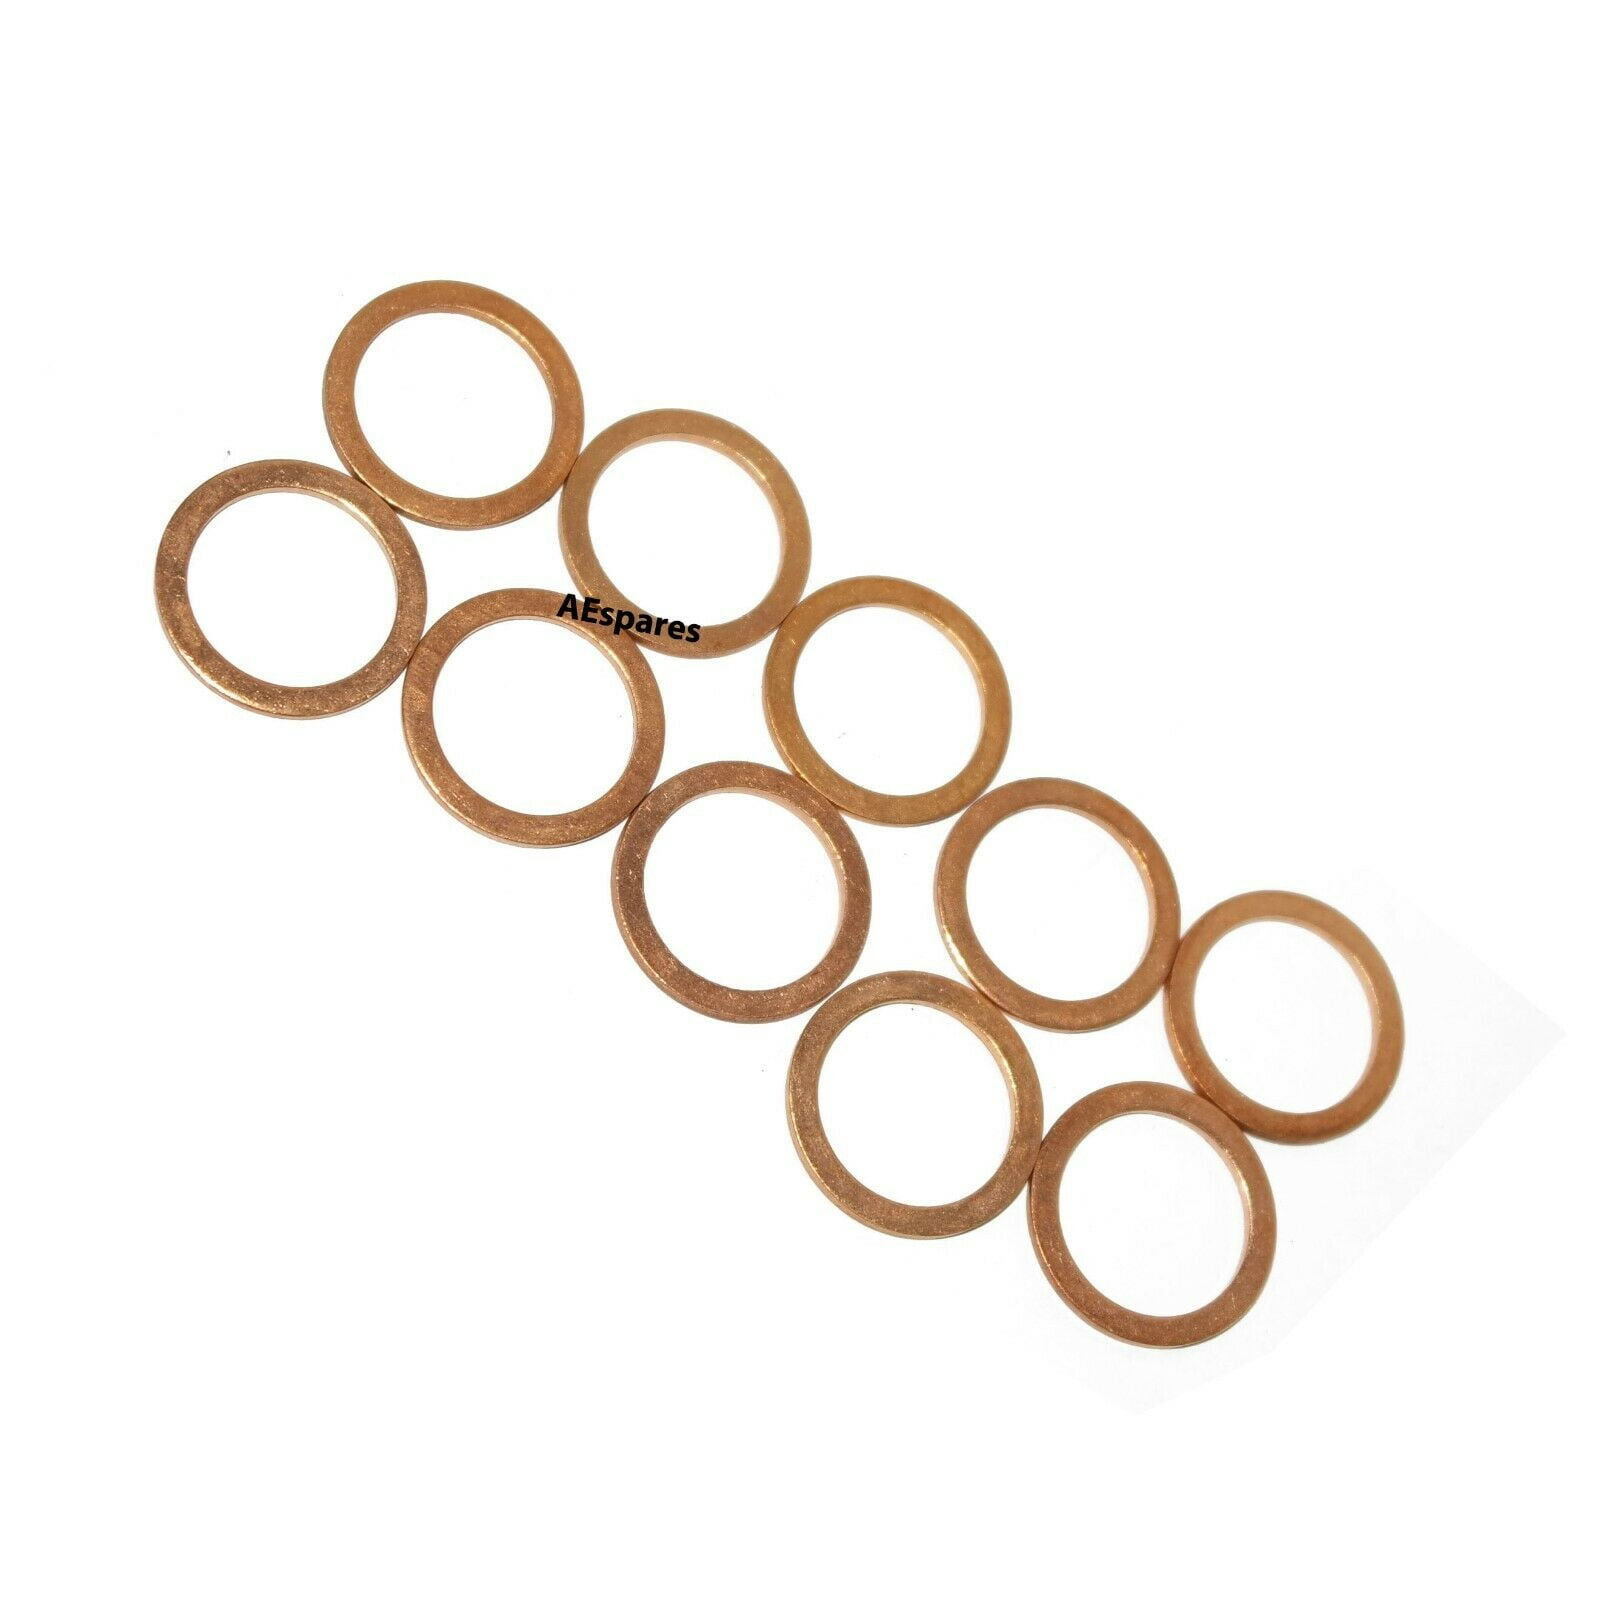 Details about   10 PCS MULTIPURPOSE COPPER CRUSH WASHER SEALING WASHER 18 mm x 24 mm @USD 